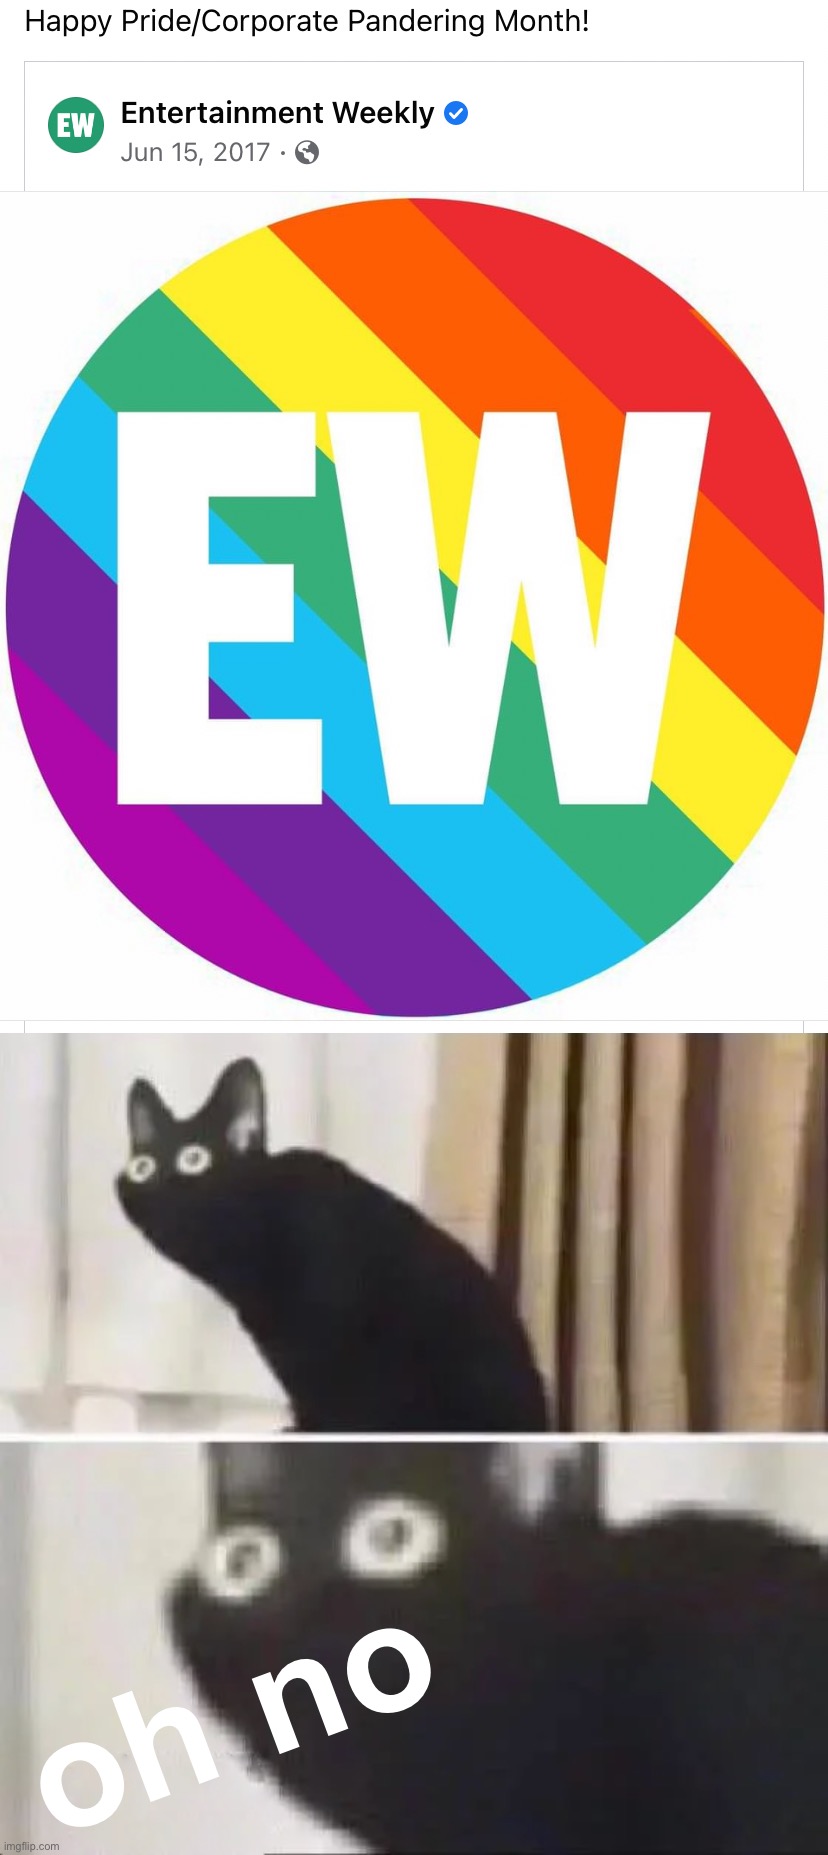 Corporate pandering gone wrong | oh no | image tagged in pride month corporate pandering,oh no black cat | made w/ Imgflip meme maker